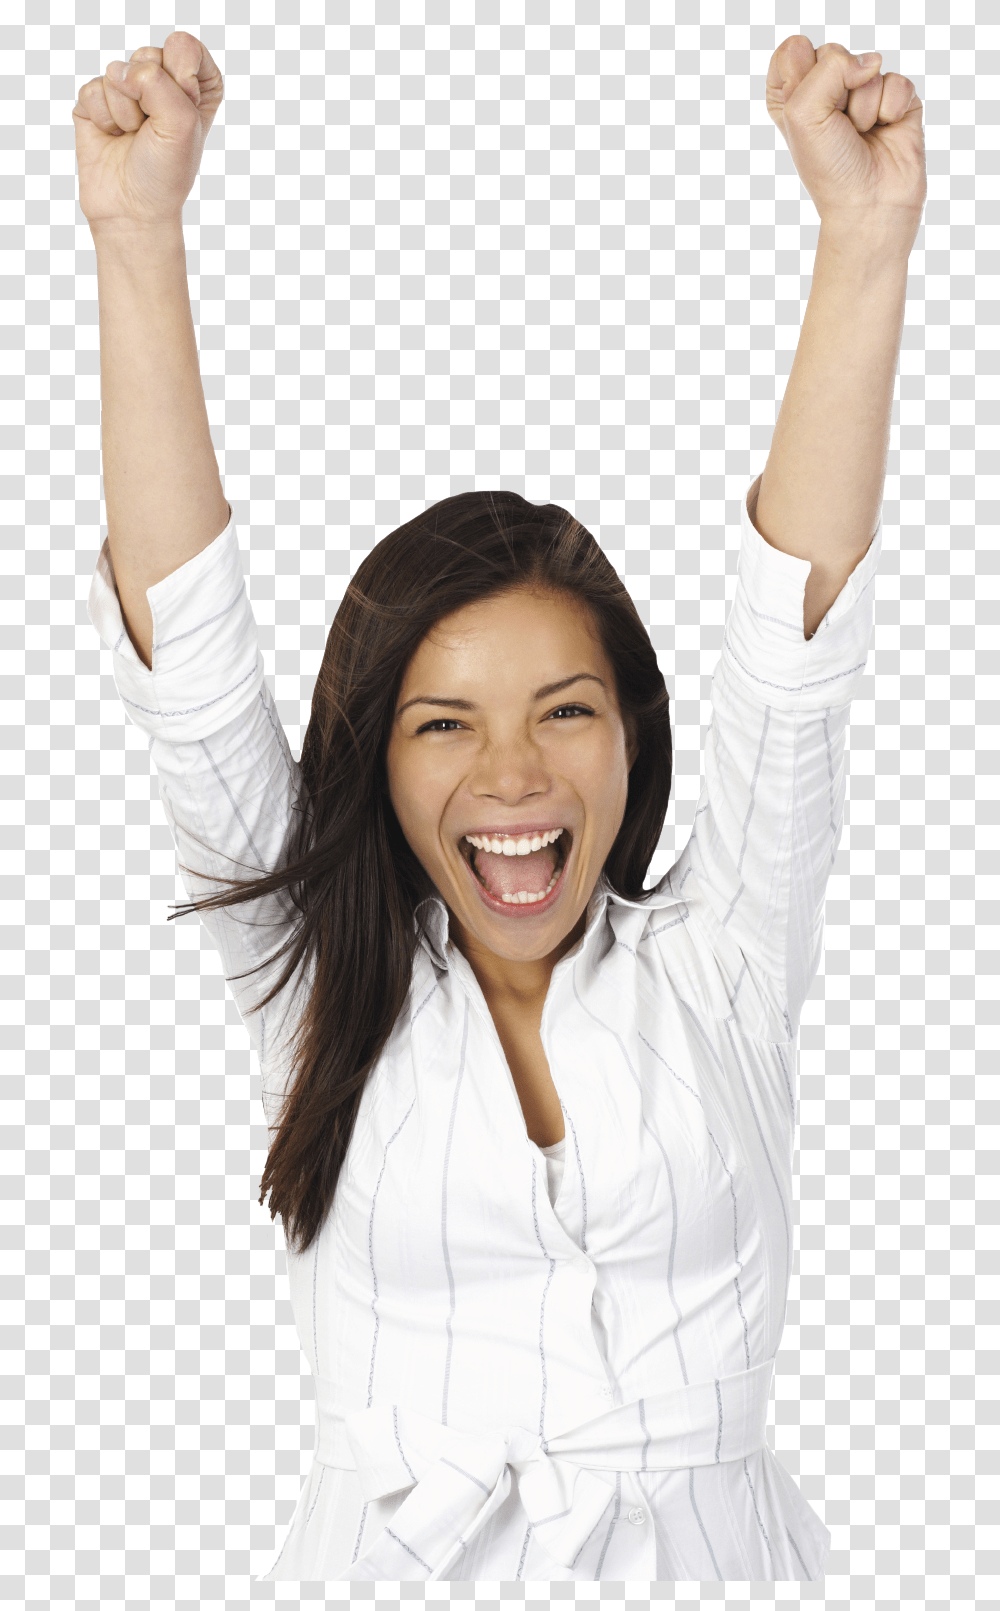 Happy People Studying Smiling Woman, Sleeve, Dance Pose, Leisure Activities Transparent Png